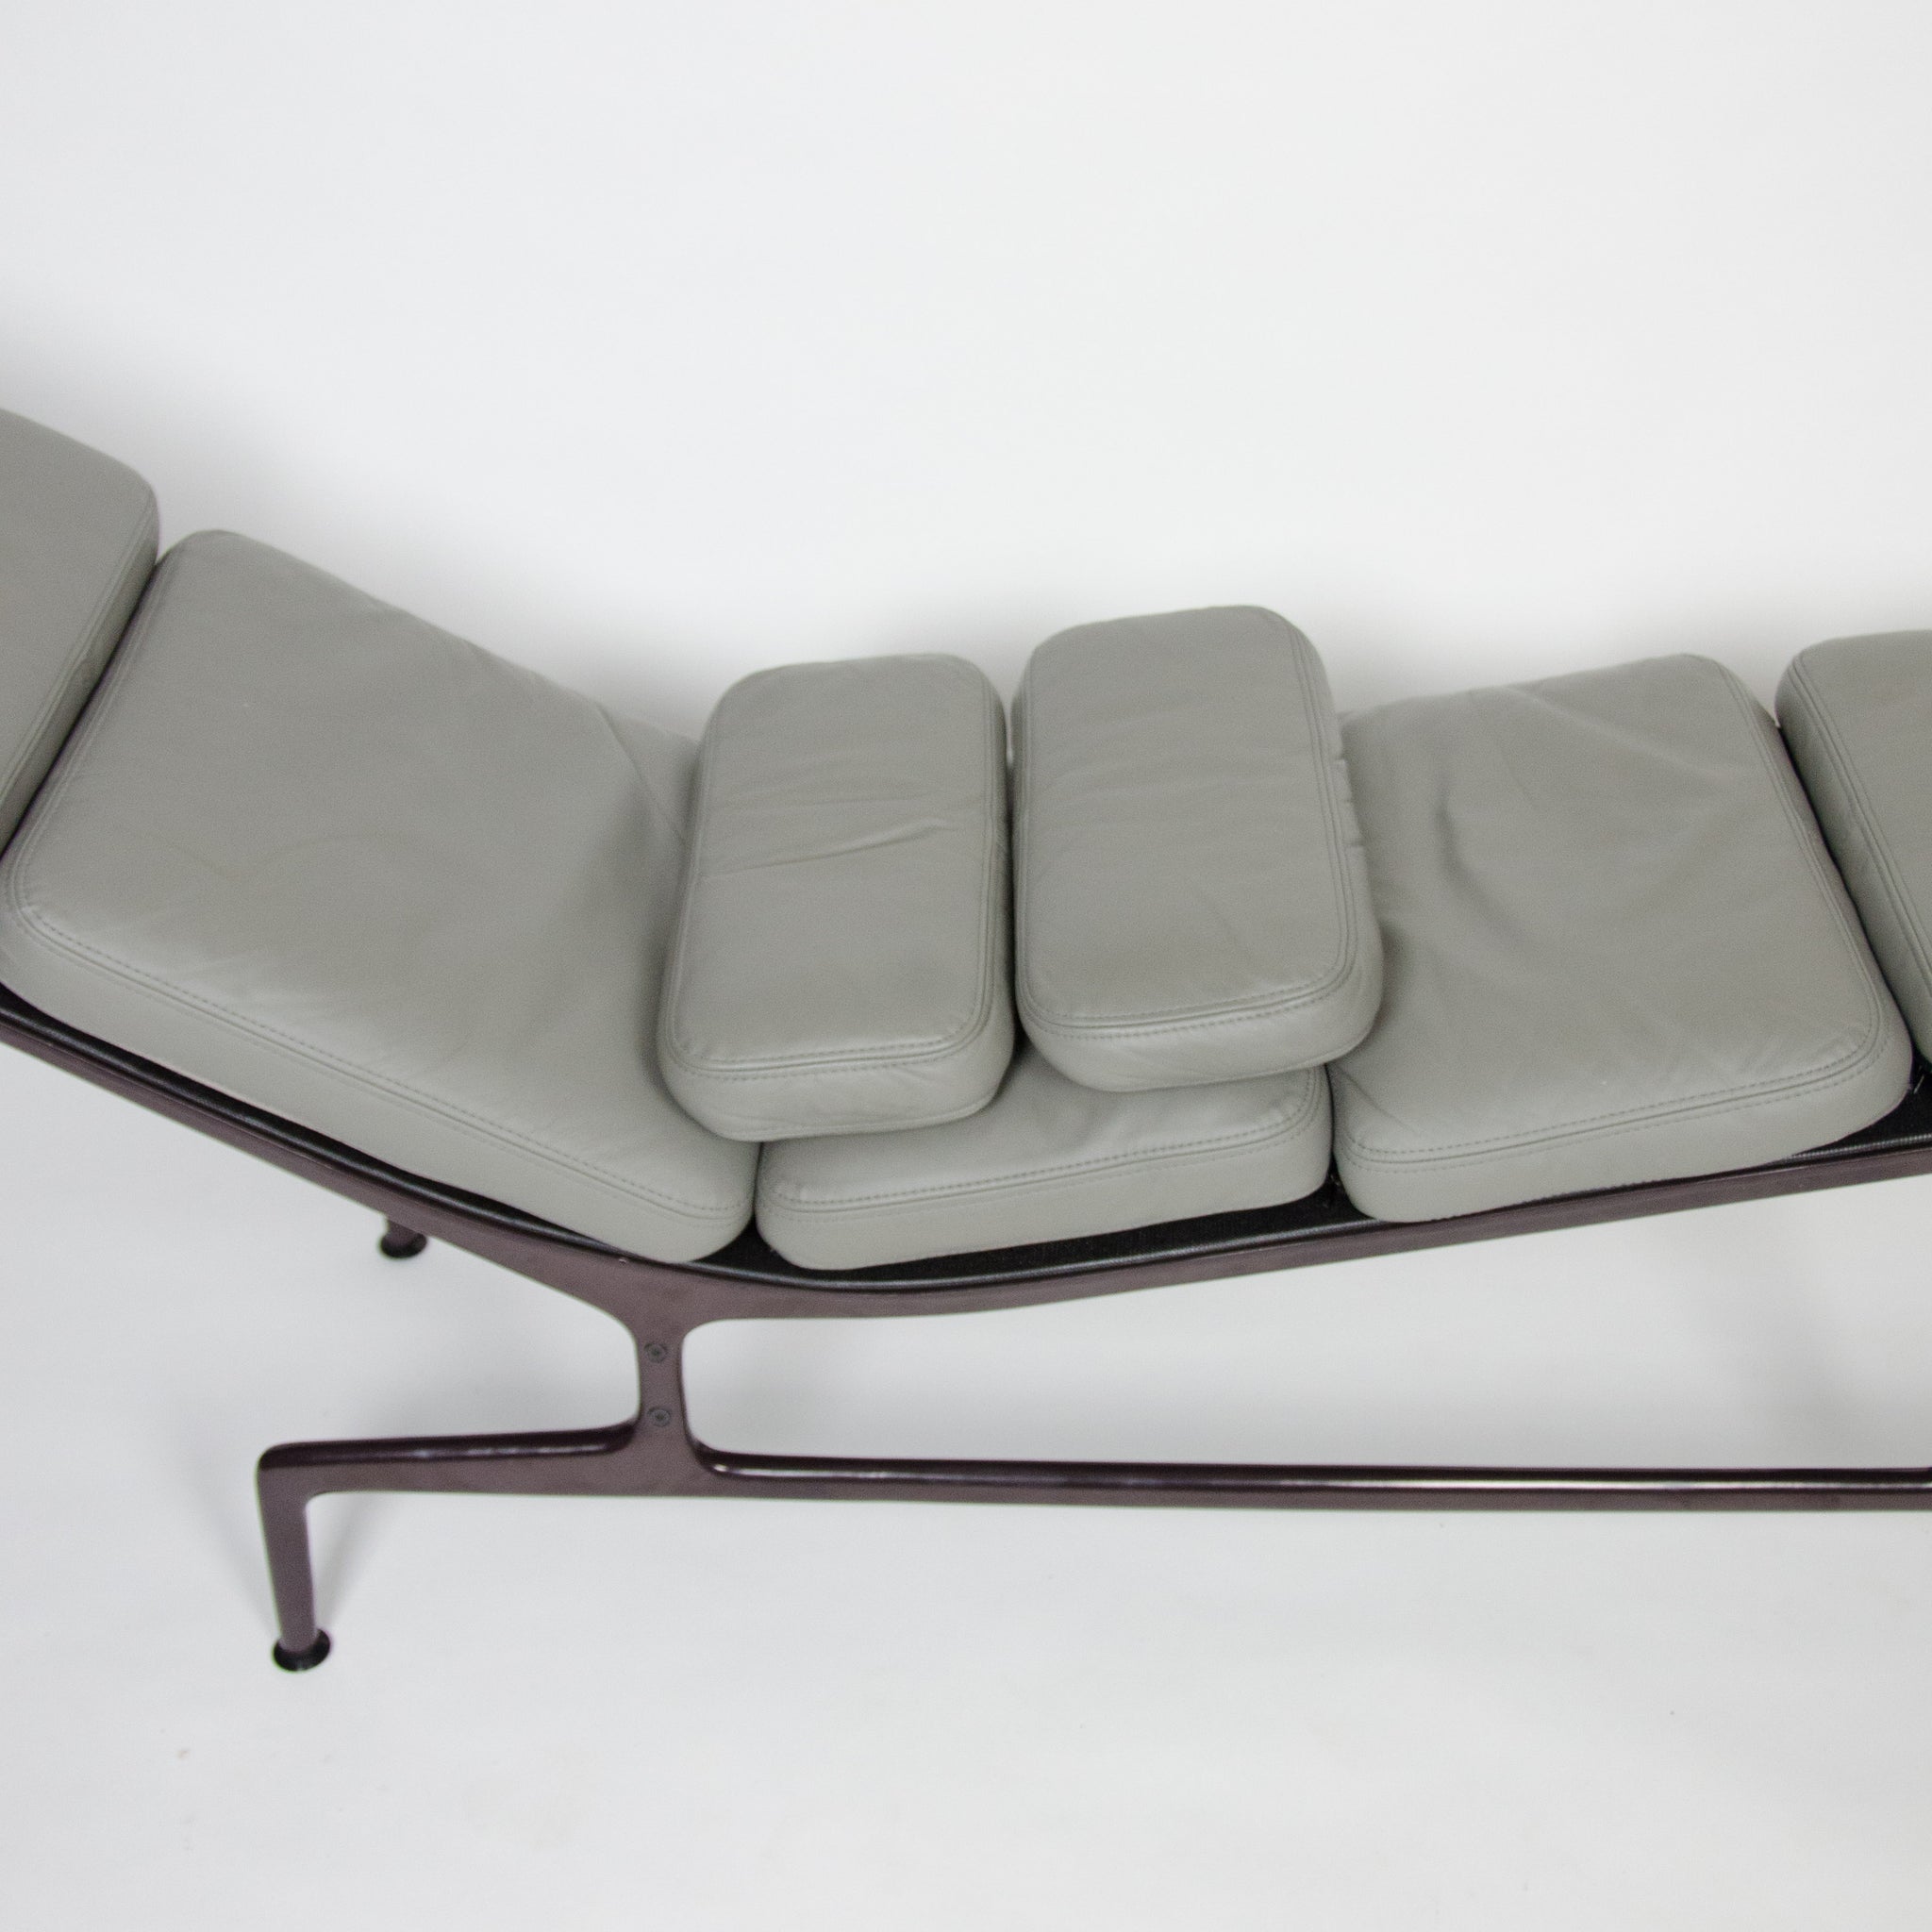 SOLD Eames Herman Miller Billy Wilder Gray and Eggplant Chaise Lounge Chair MINT